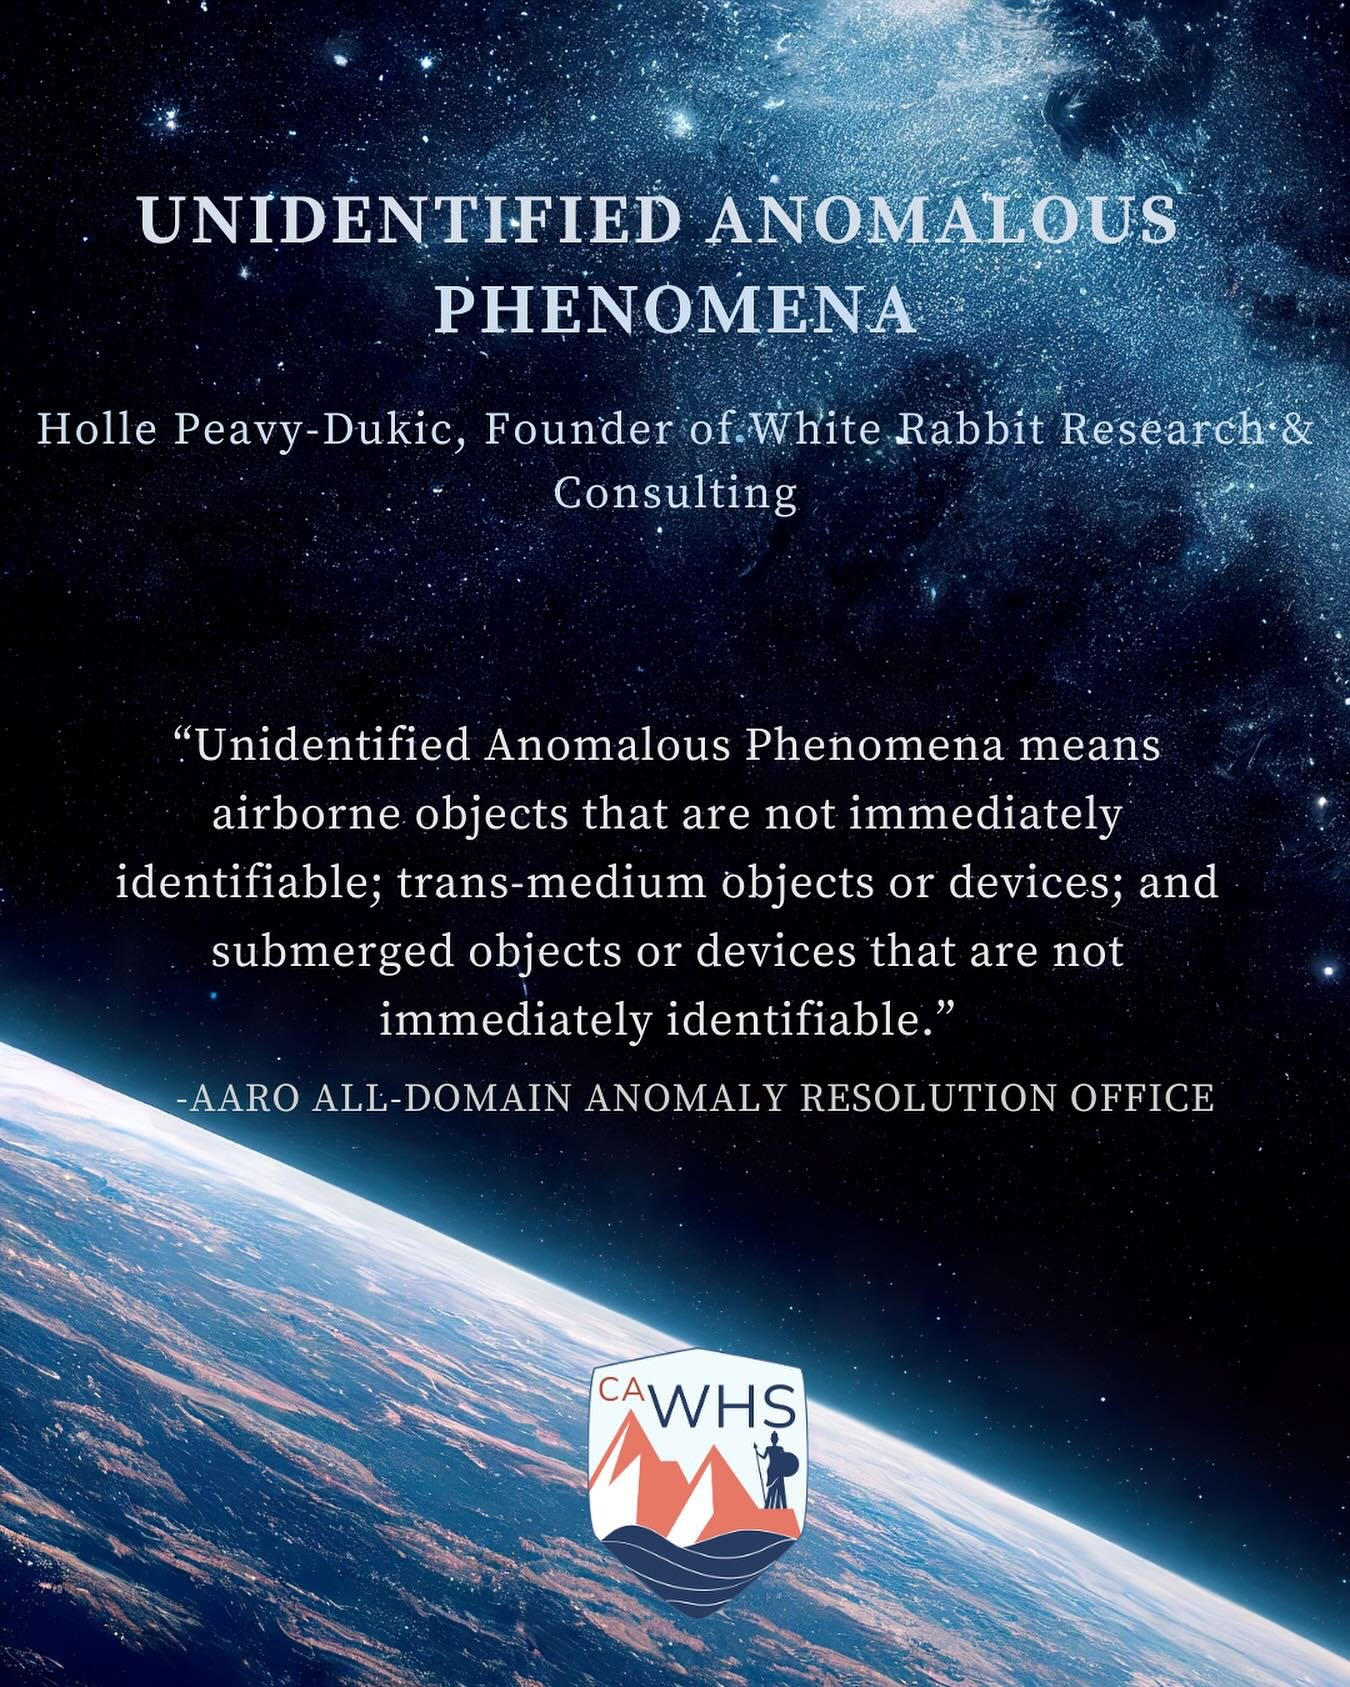 Ever wonder about those mysterious airborne objects that defy explanation? Or what about those submerged anomalies lurking beneath the depths, waiting to be discovered? 

Holle Peavy-Dukic, Founder of White Rabbit Research &amp; Consulting, provided 